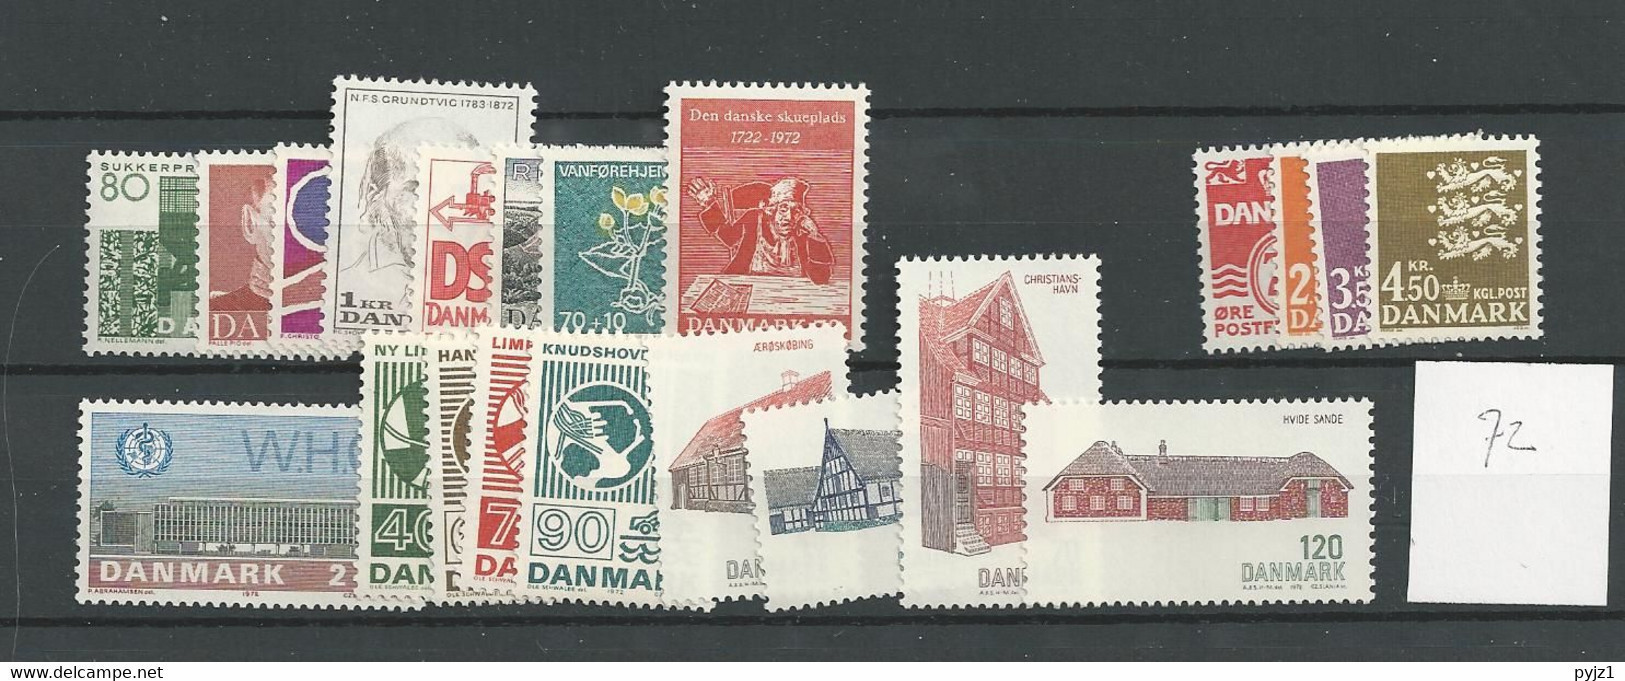 1972 MNH Denmark, Year Complete, Postfris** - Annate Complete